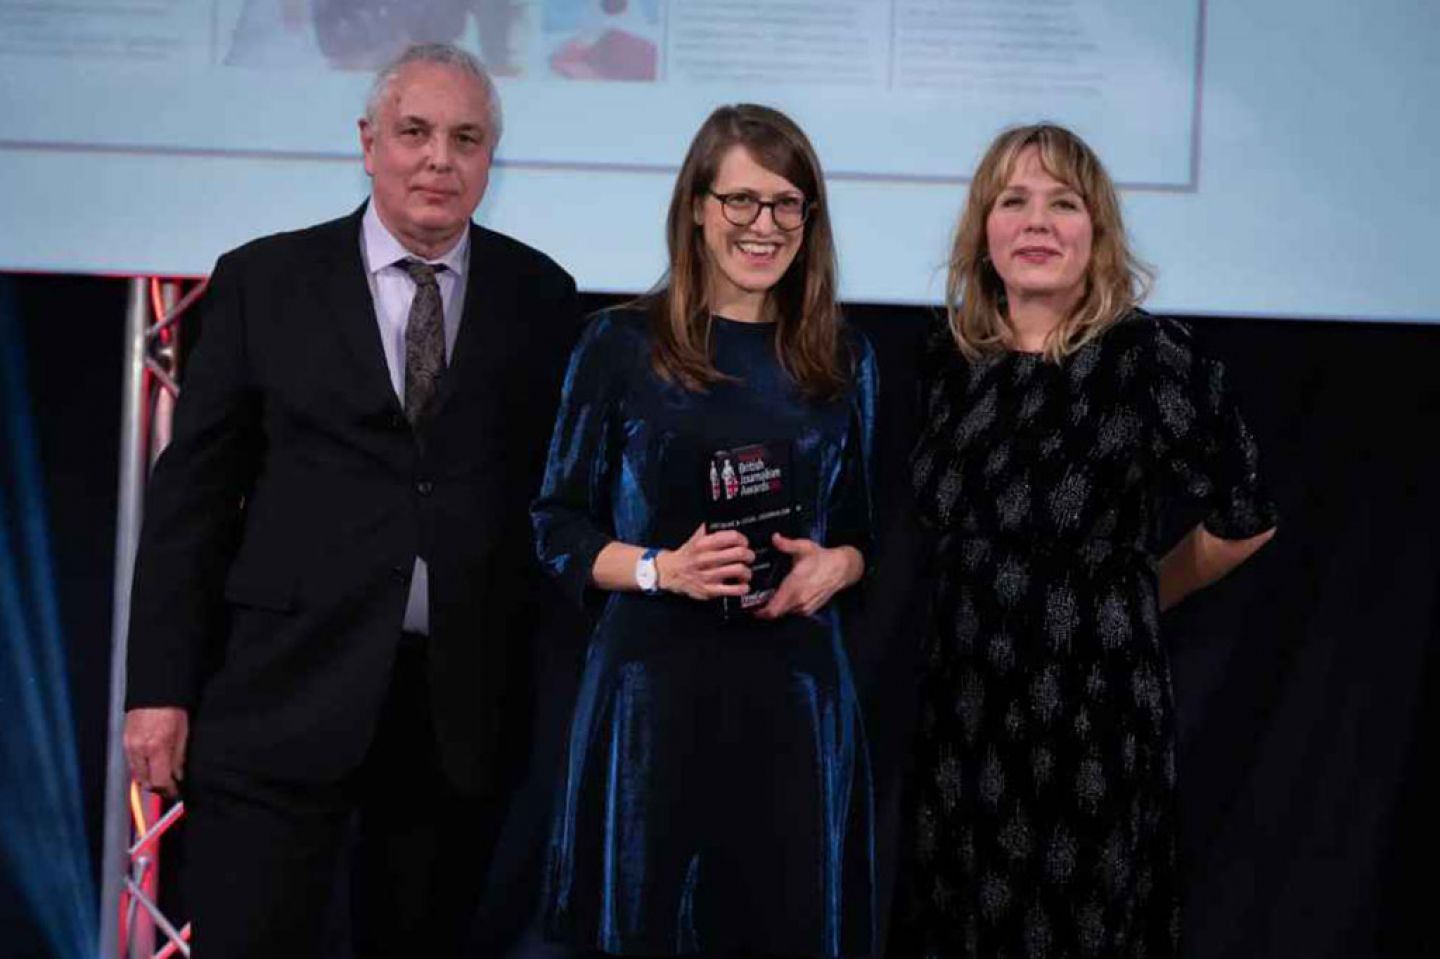 Alumna Emily Dugan stands in the middle of the picture holding her award at the British Journalism Awards 2023.